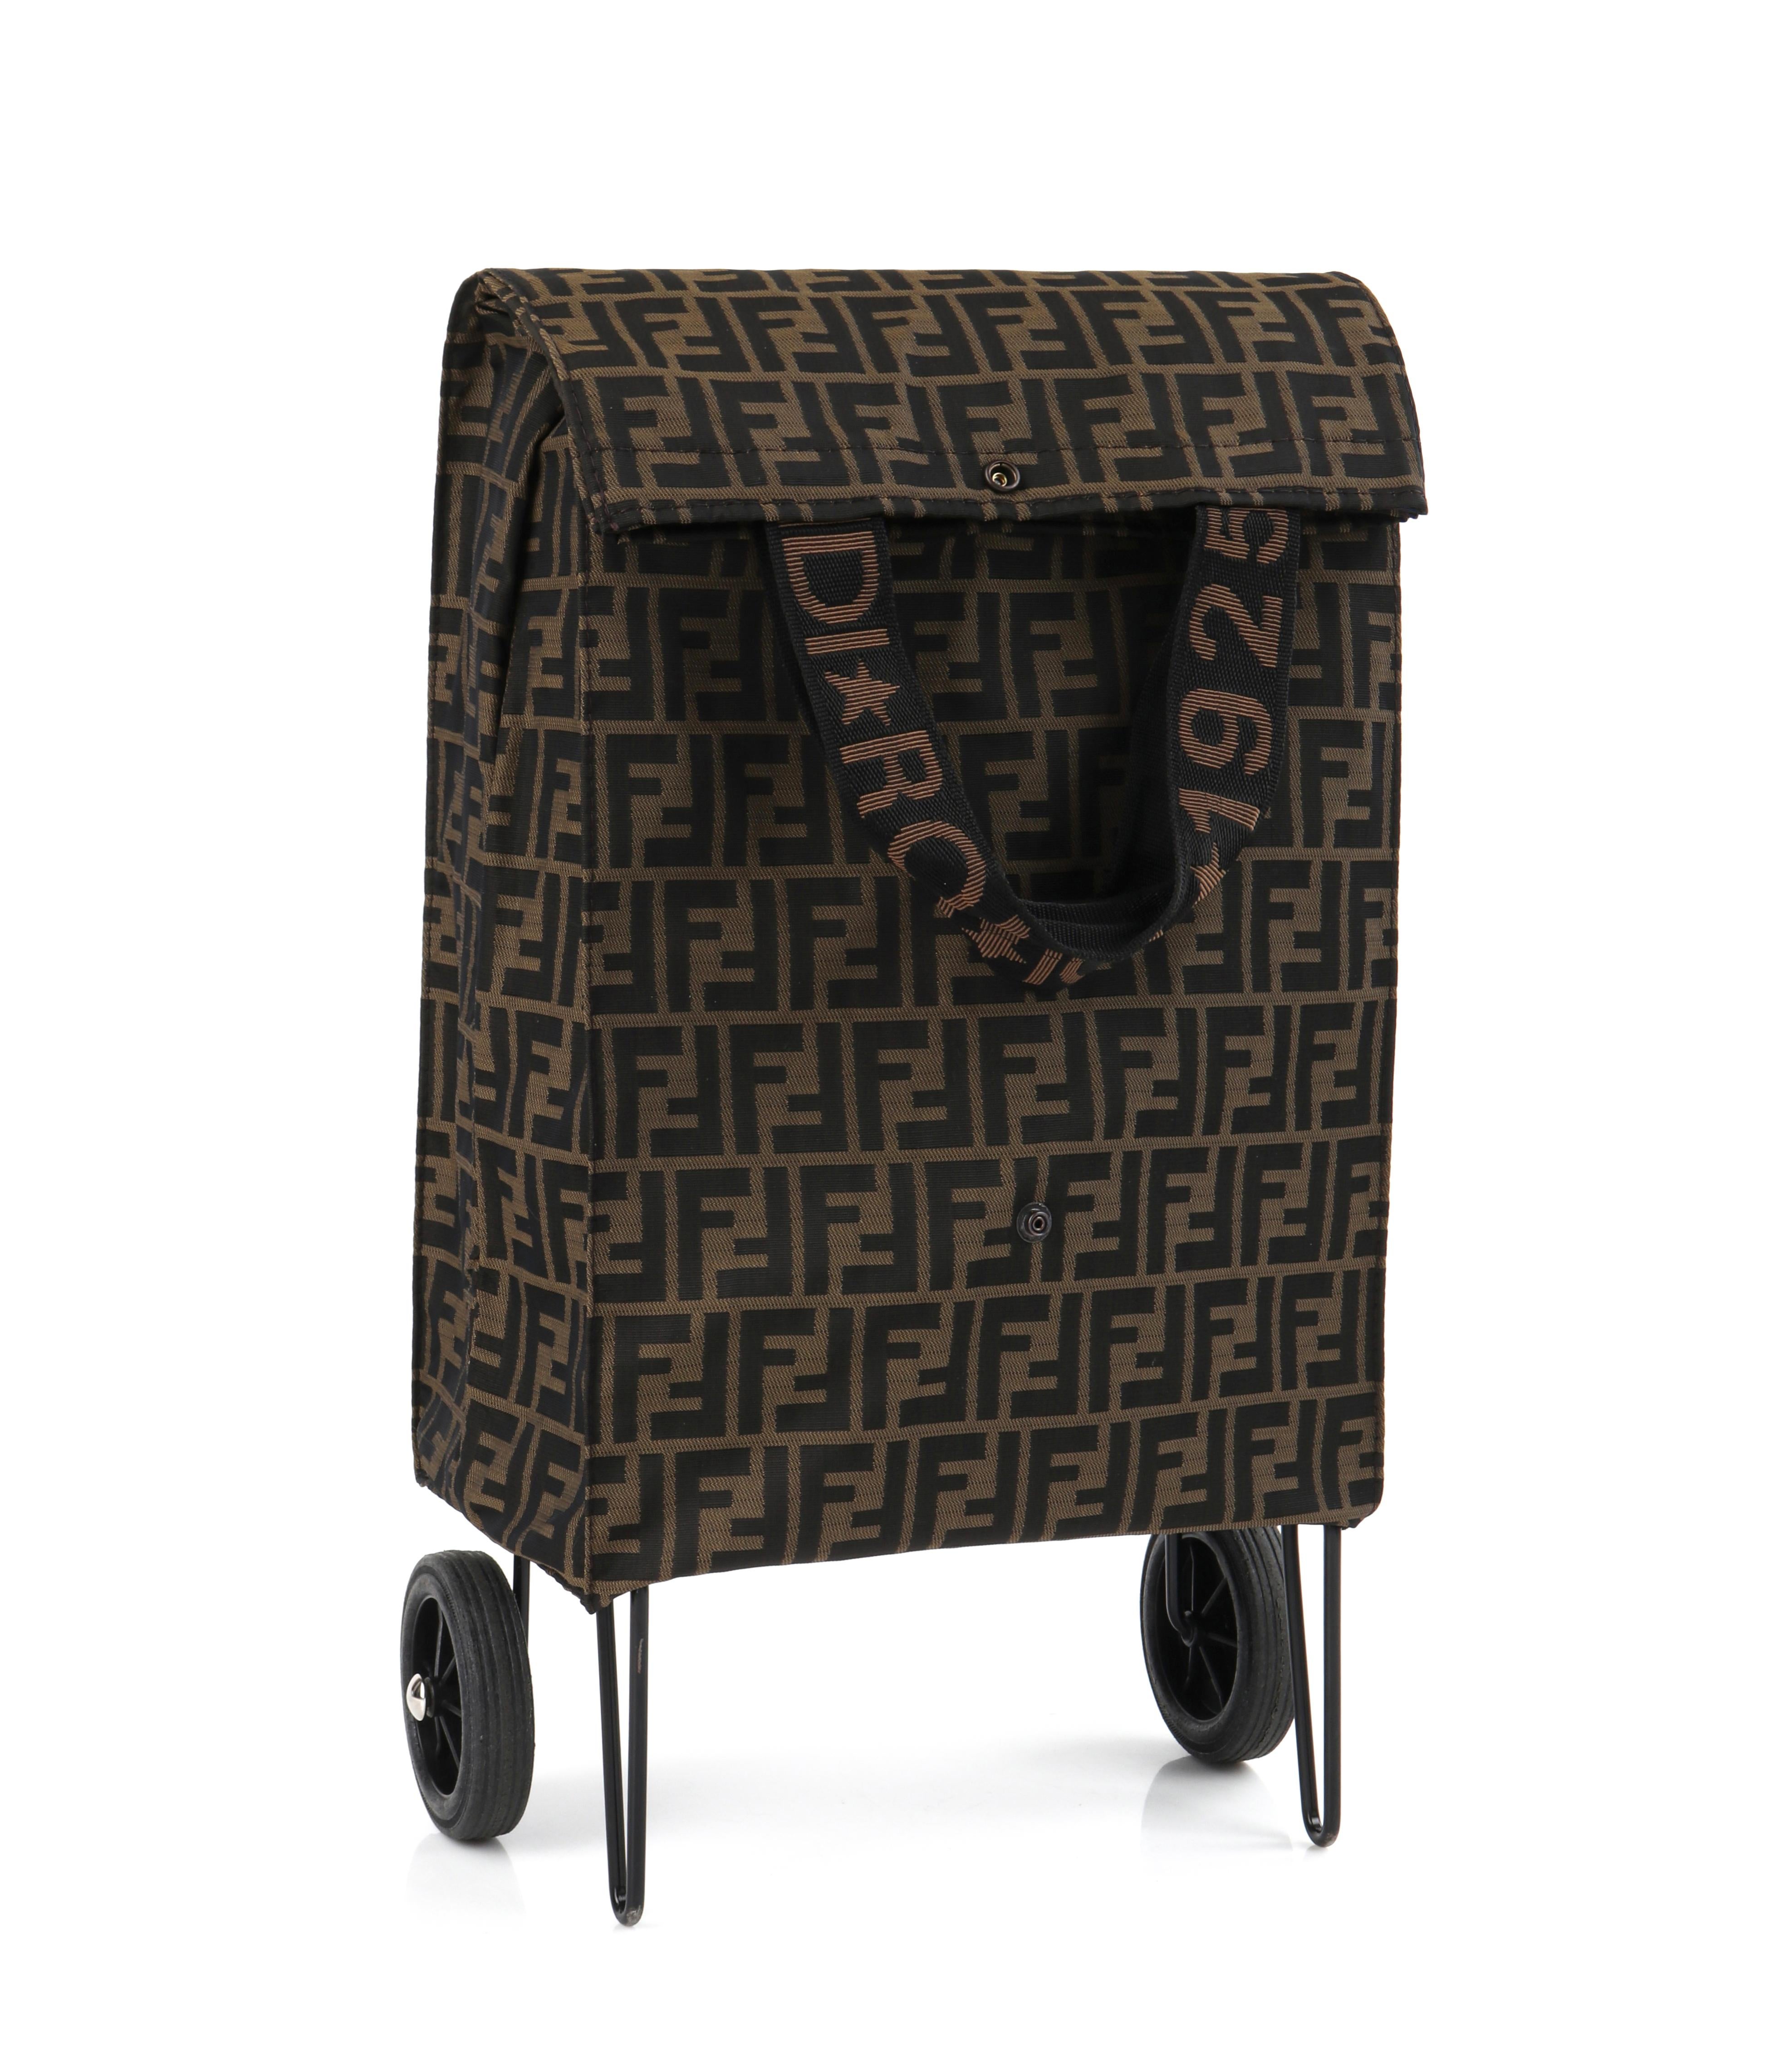 FENDI c.1980s Jolly Trailer Multiway Monogram Canvas Soft Cover Luggage Bag 
 
Brand / Manufacturer: Fendi
Circa: 1980’s
Manufacturer Style Name: “Jolly Trailer”
Style: Carry on suitcase
Color(s): Shades of tan, brown, and black
Lined: Yes
Unmarked